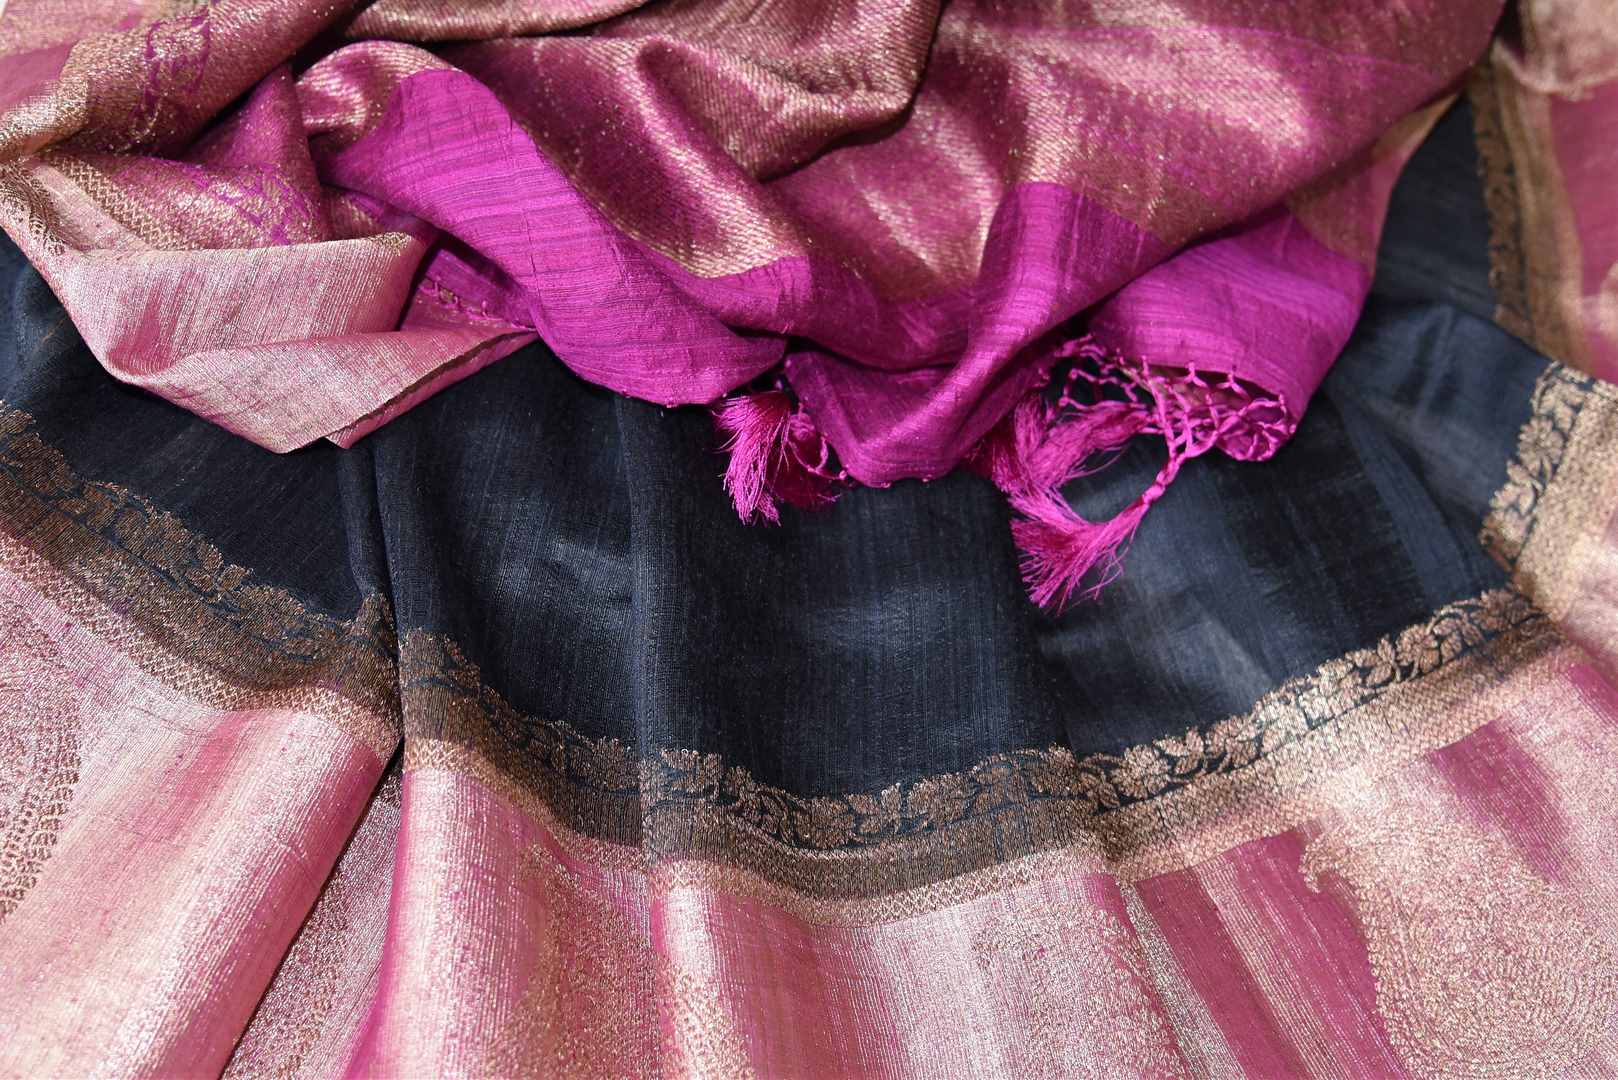 Buy black tussar Benarasi saree online in USA with pink zari border and pallu. Make an elegant ethnic fashion statement at parties, weddings and special occasions with a splendid collection of Indian designer sarees, Banarasi saris, handwoven saris from Pure Elegance Indian clothing store in USA or shop online.-details